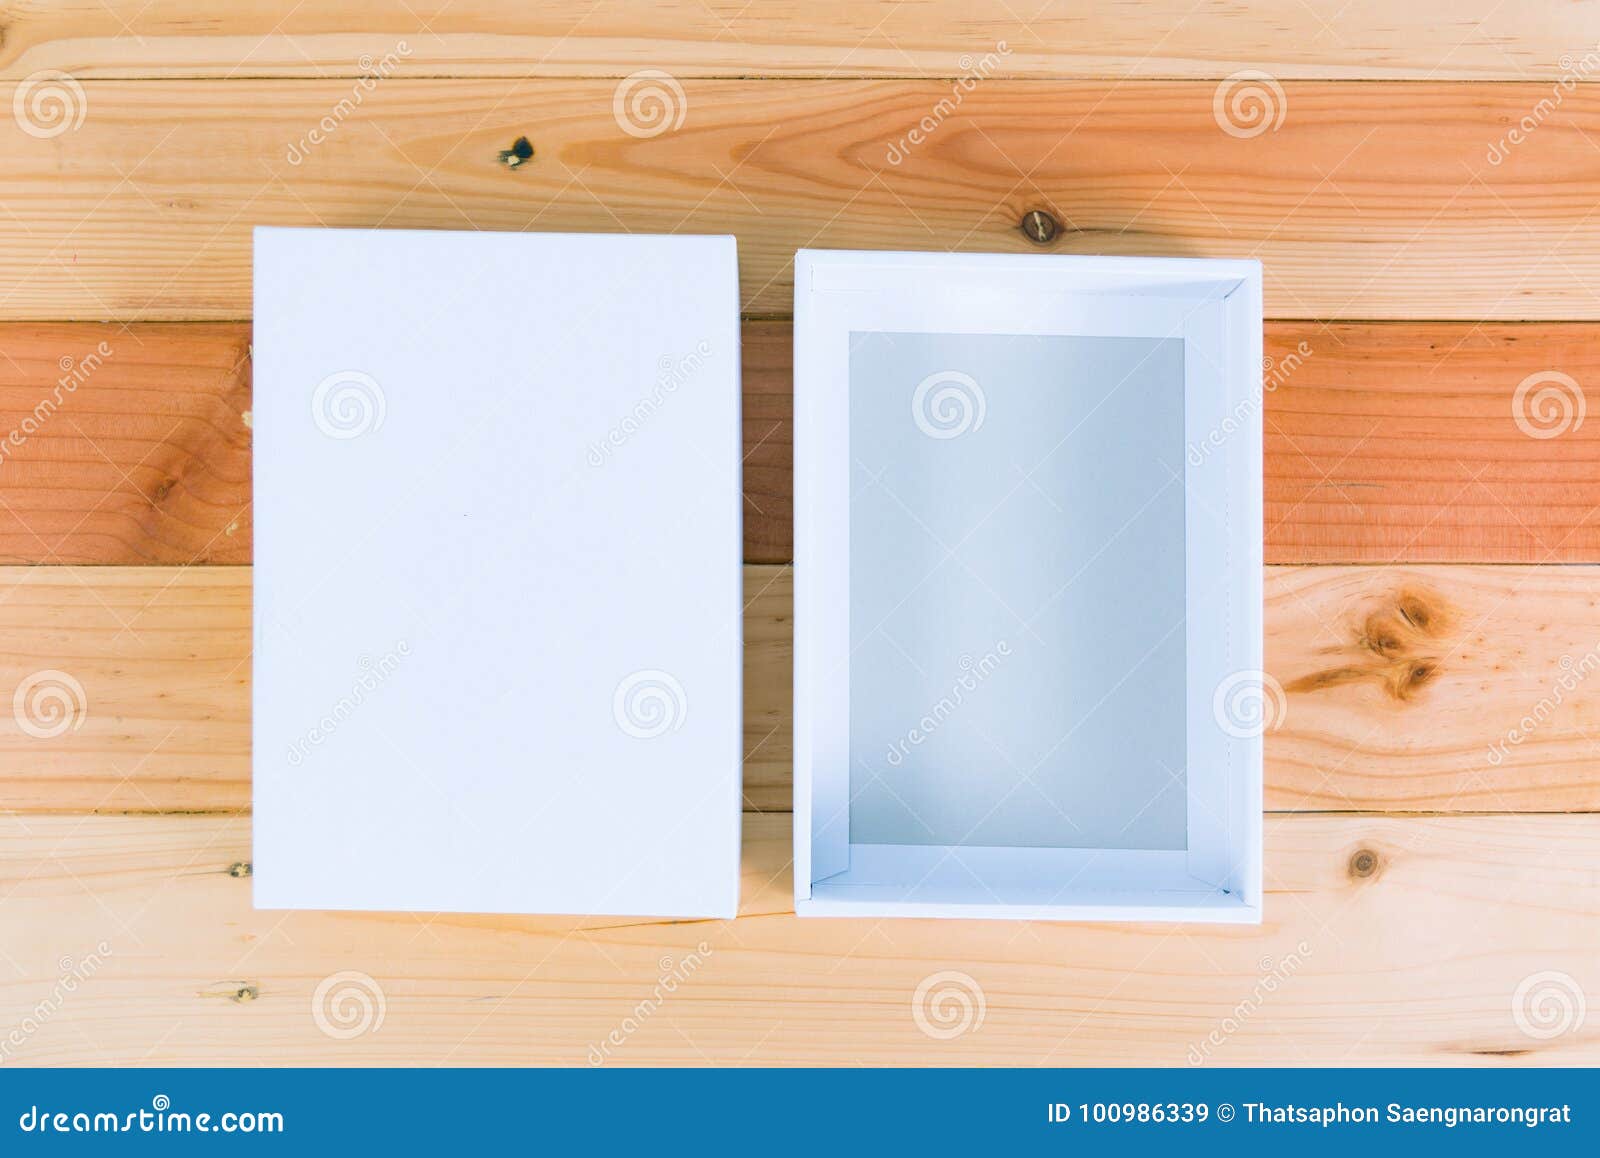 Download Top View Of Empty White Gift Box On Wooden Table With Copy ...